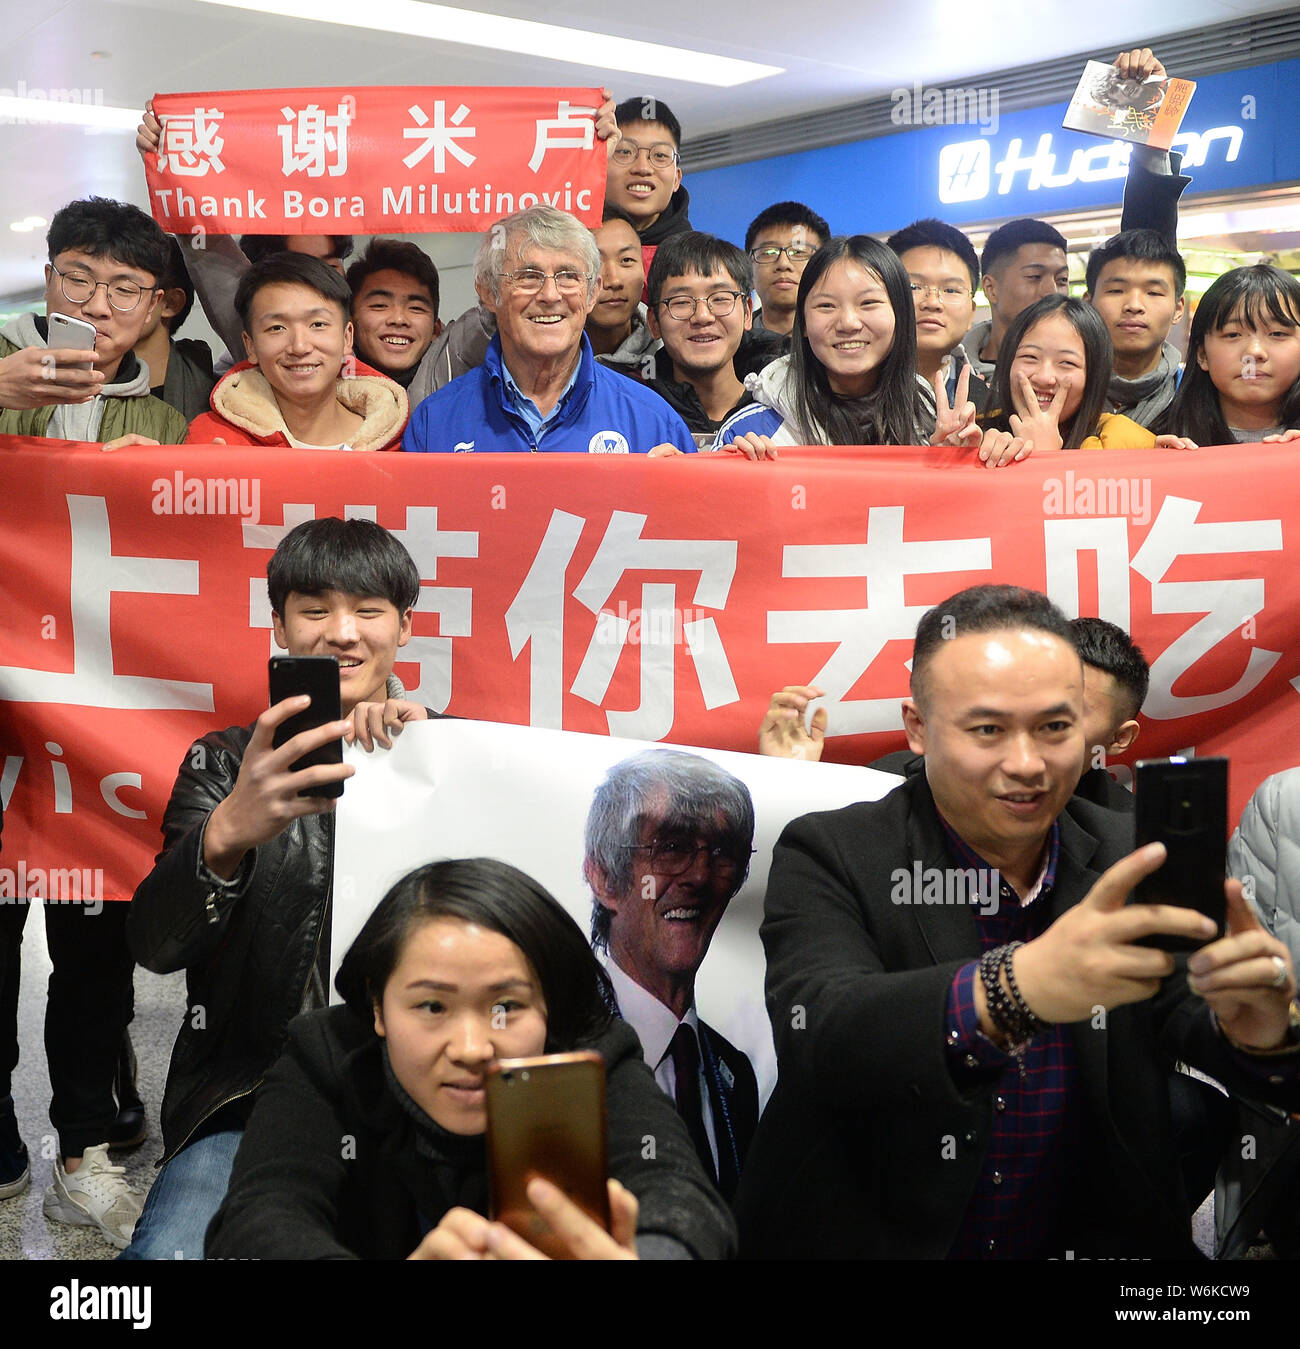 Serbian football coach and former player Bora Milutinovic, center, poses for photos with fans as he arrives at the Chengdu Shuangliu International Air Stock Photo